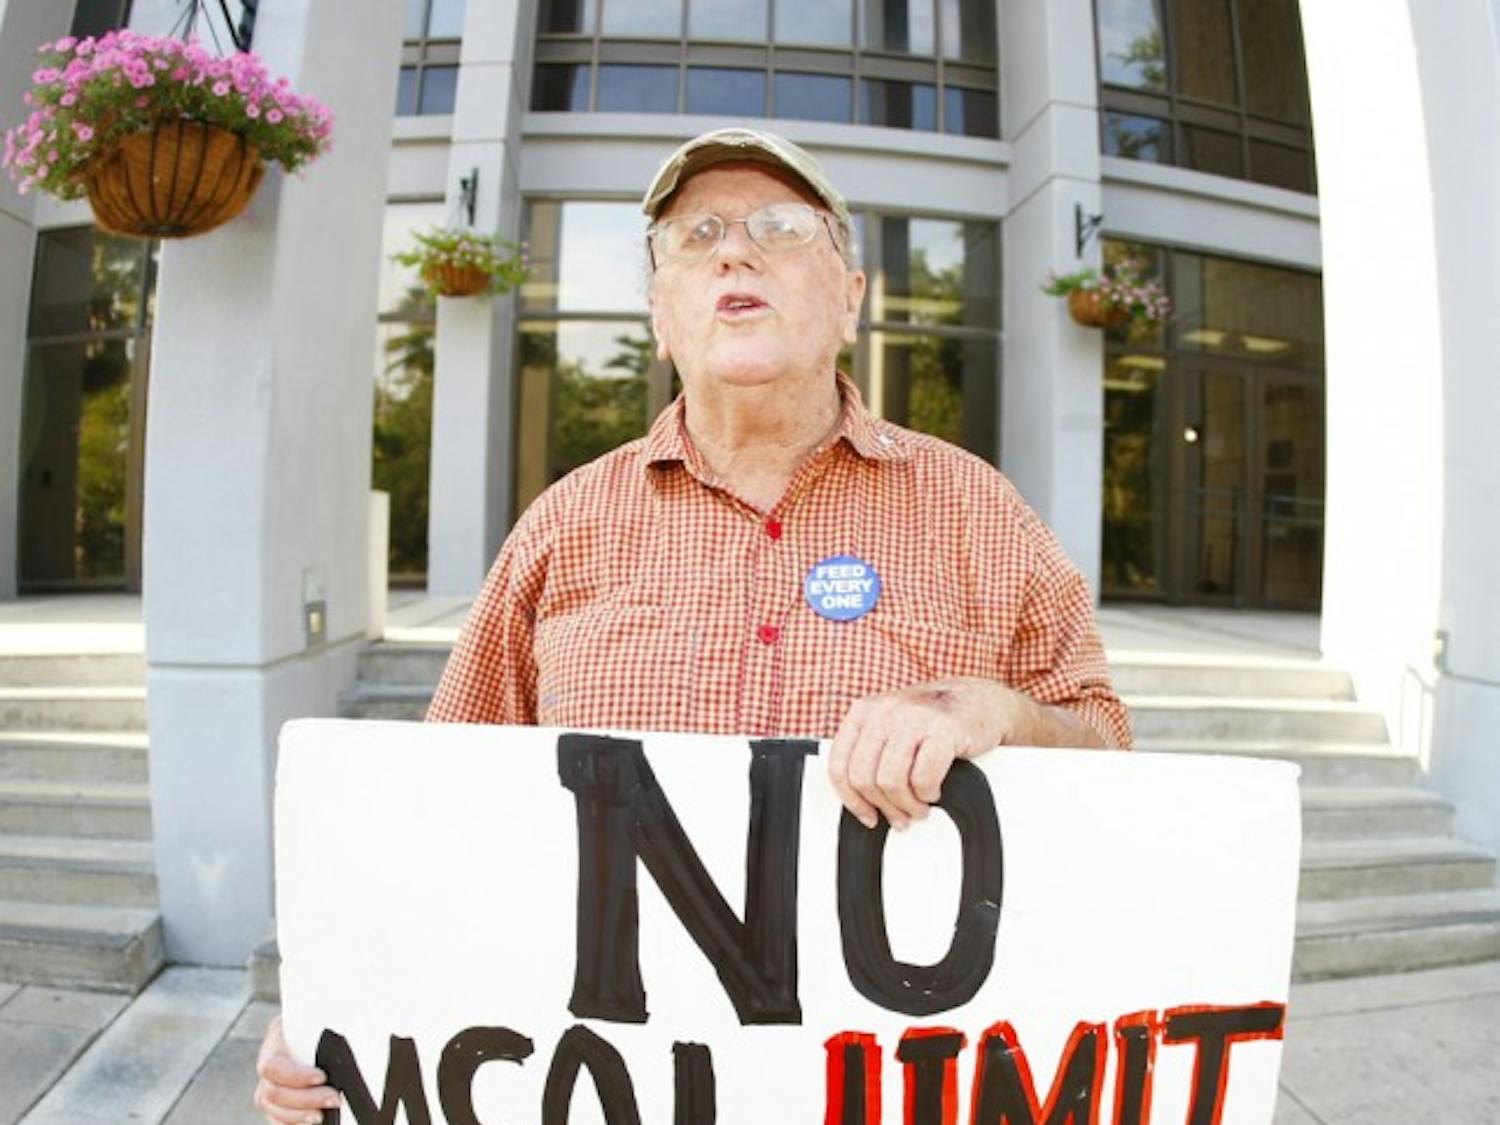 Pat Fitzpatrick stands outside City Hall on Monday afternoon. Fitzpatrick and other protestors were arrested last October for trespassing on Bo Diddley Community Plaza.